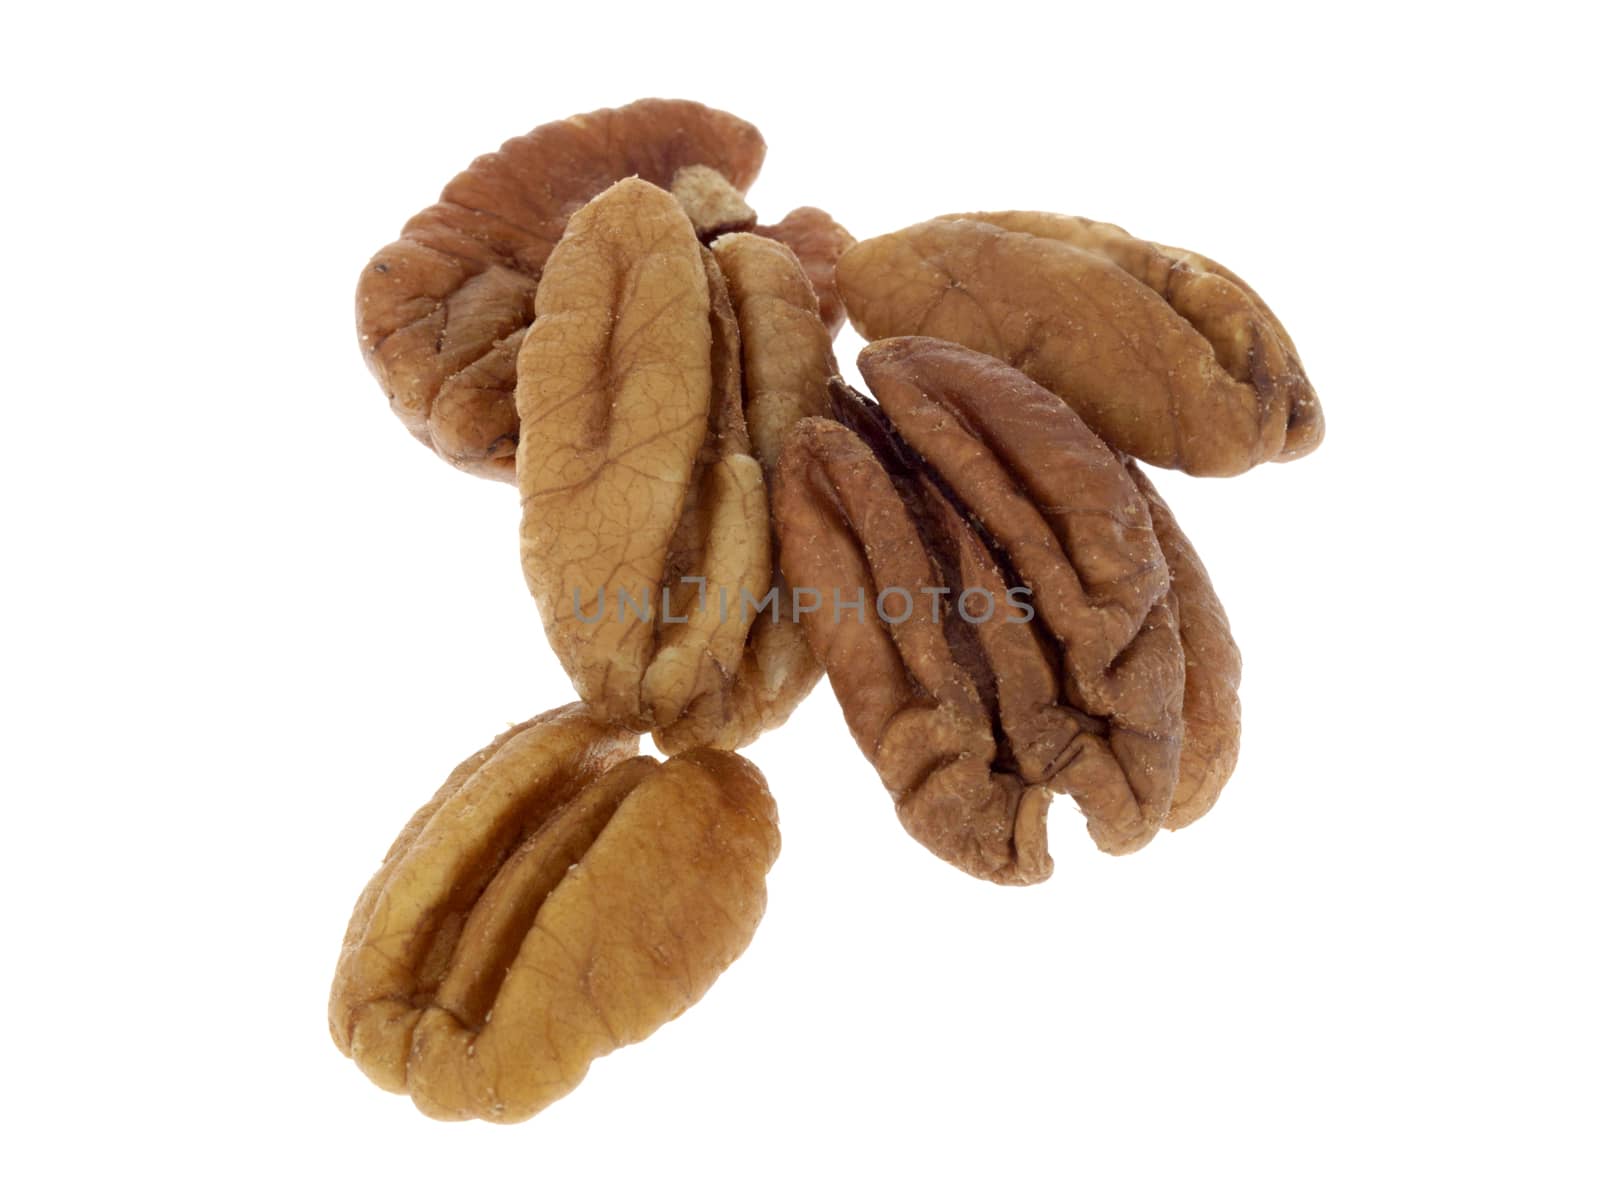 Pecan Nuts by Whiteboxmedia